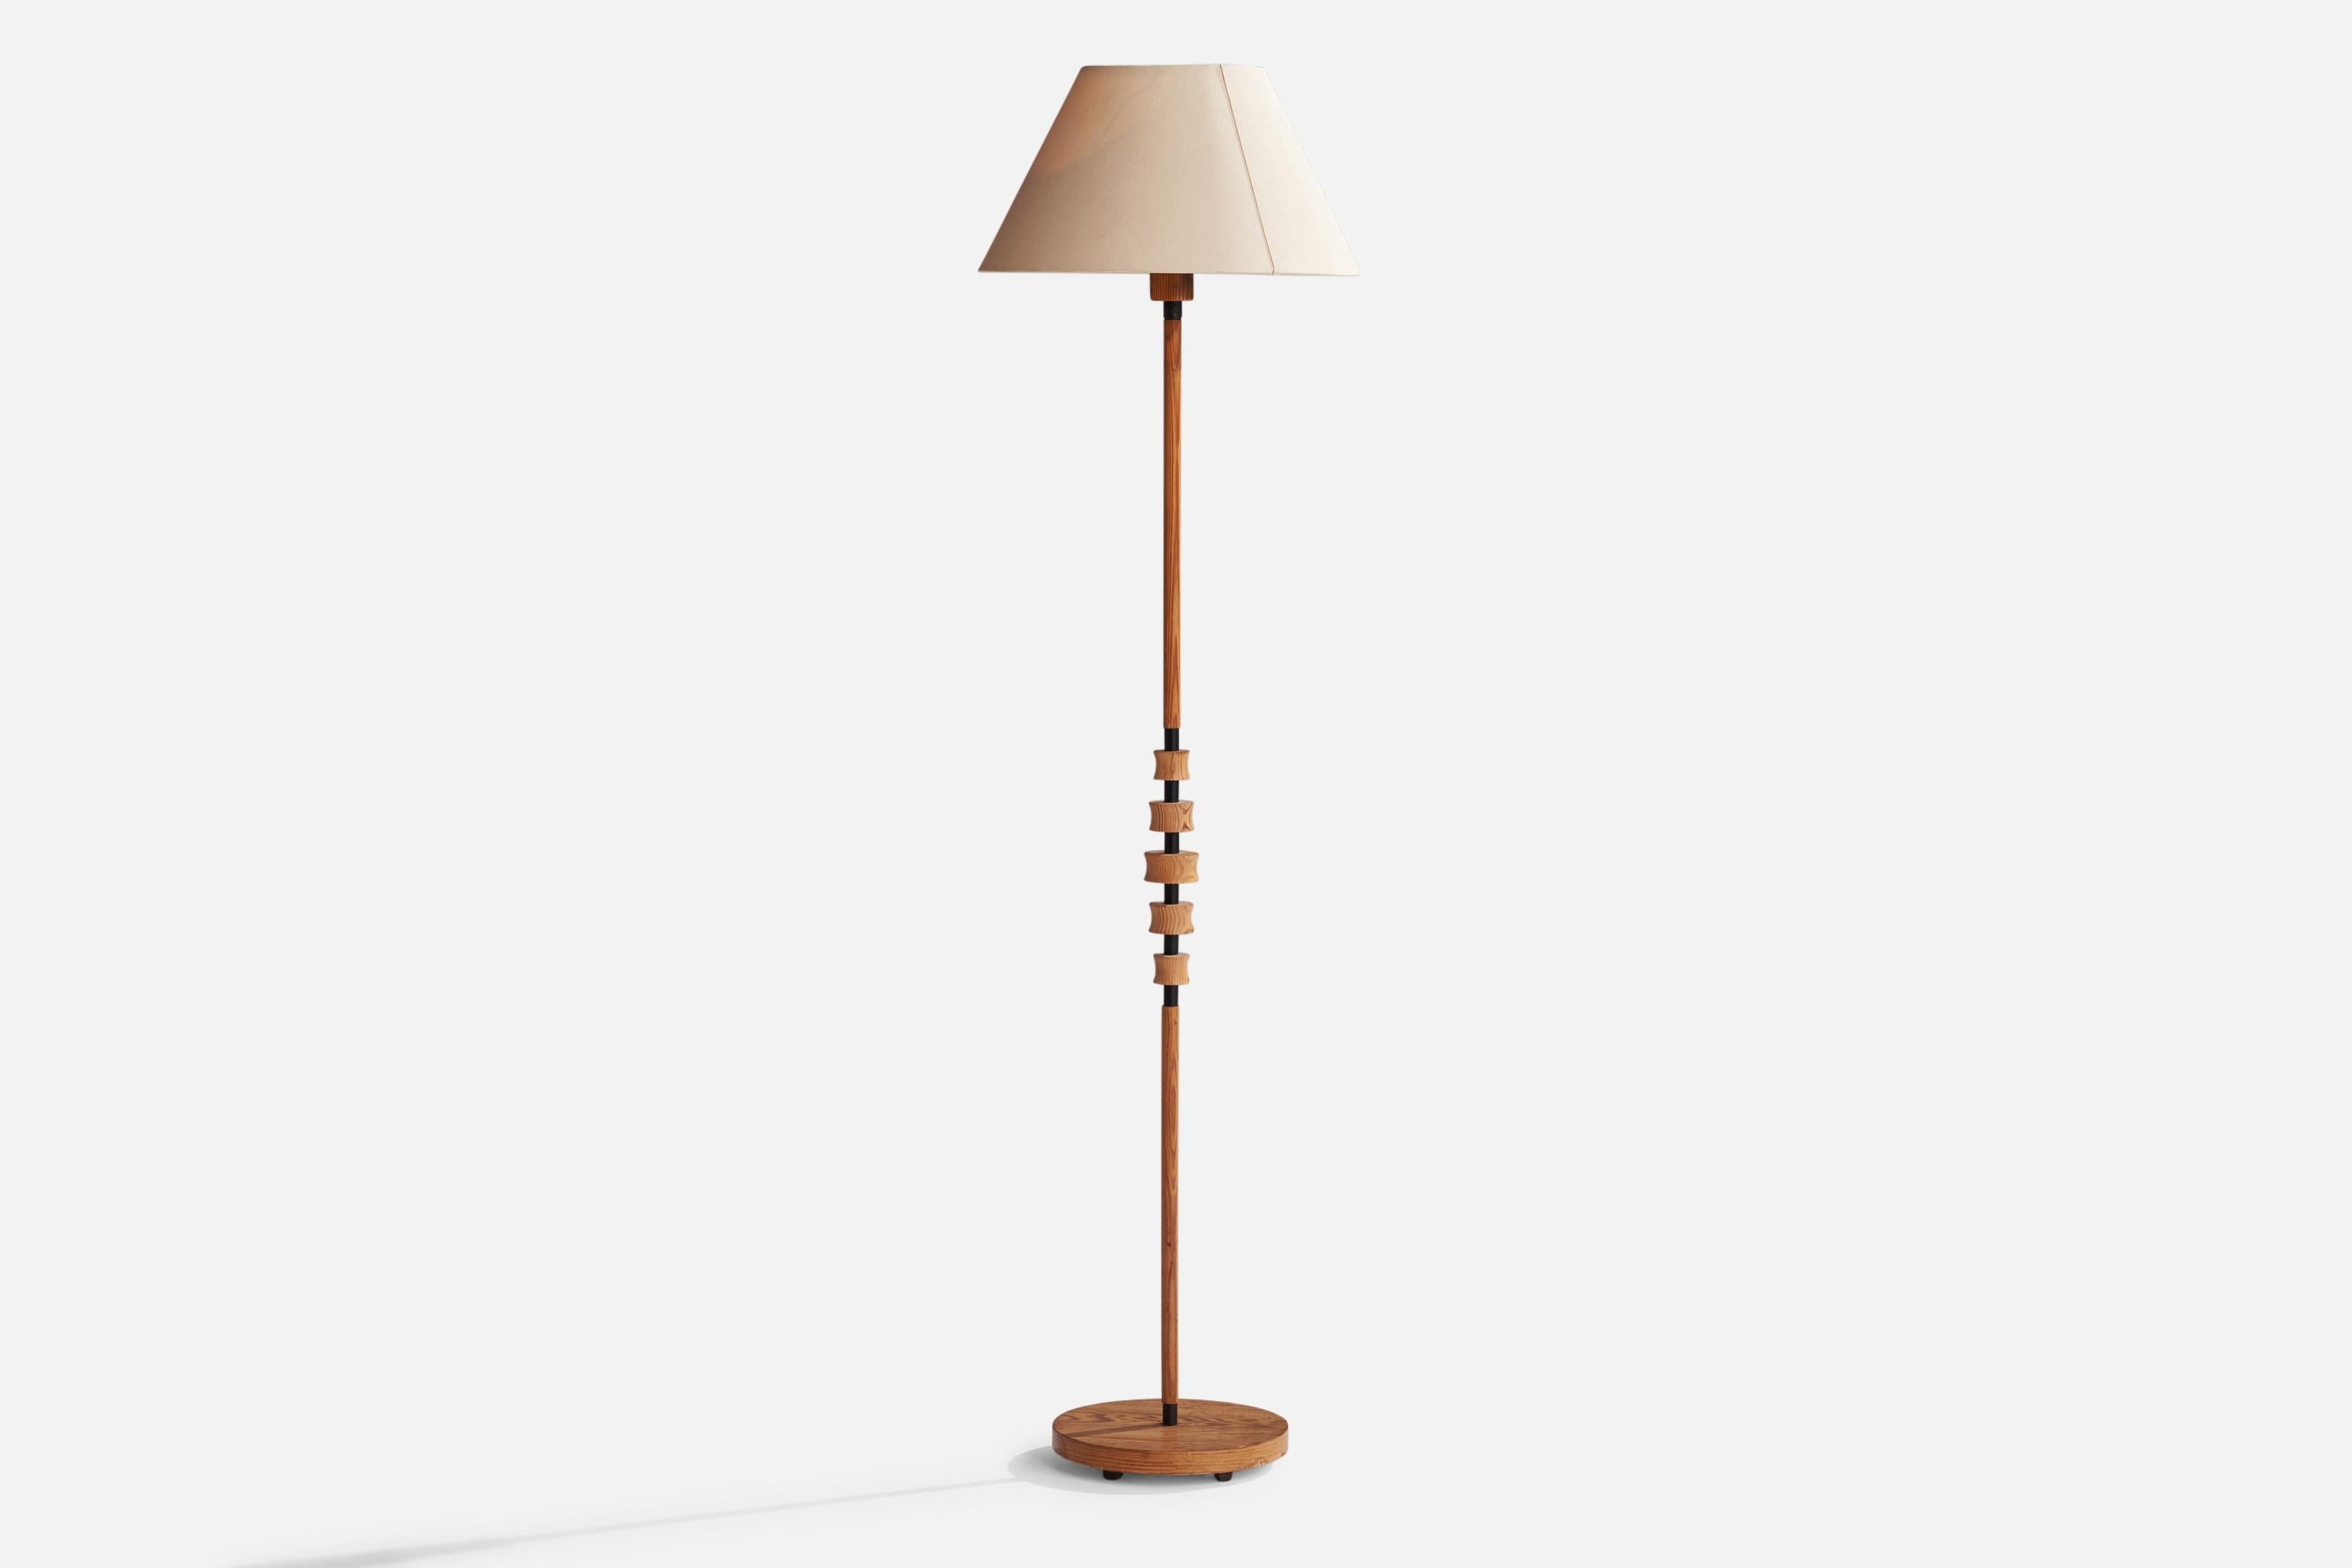 A pine, black-lacquered metal and off-white paper floor lamp designed and produced in Sweden, 1950s.

Overall Dimensions (inches): 58.5”  H x 15.75” W x 15.5” D
Stated dimensions include shade.
Bulb Specifications: E-26 Bulb
Number of Sockets: 1
All